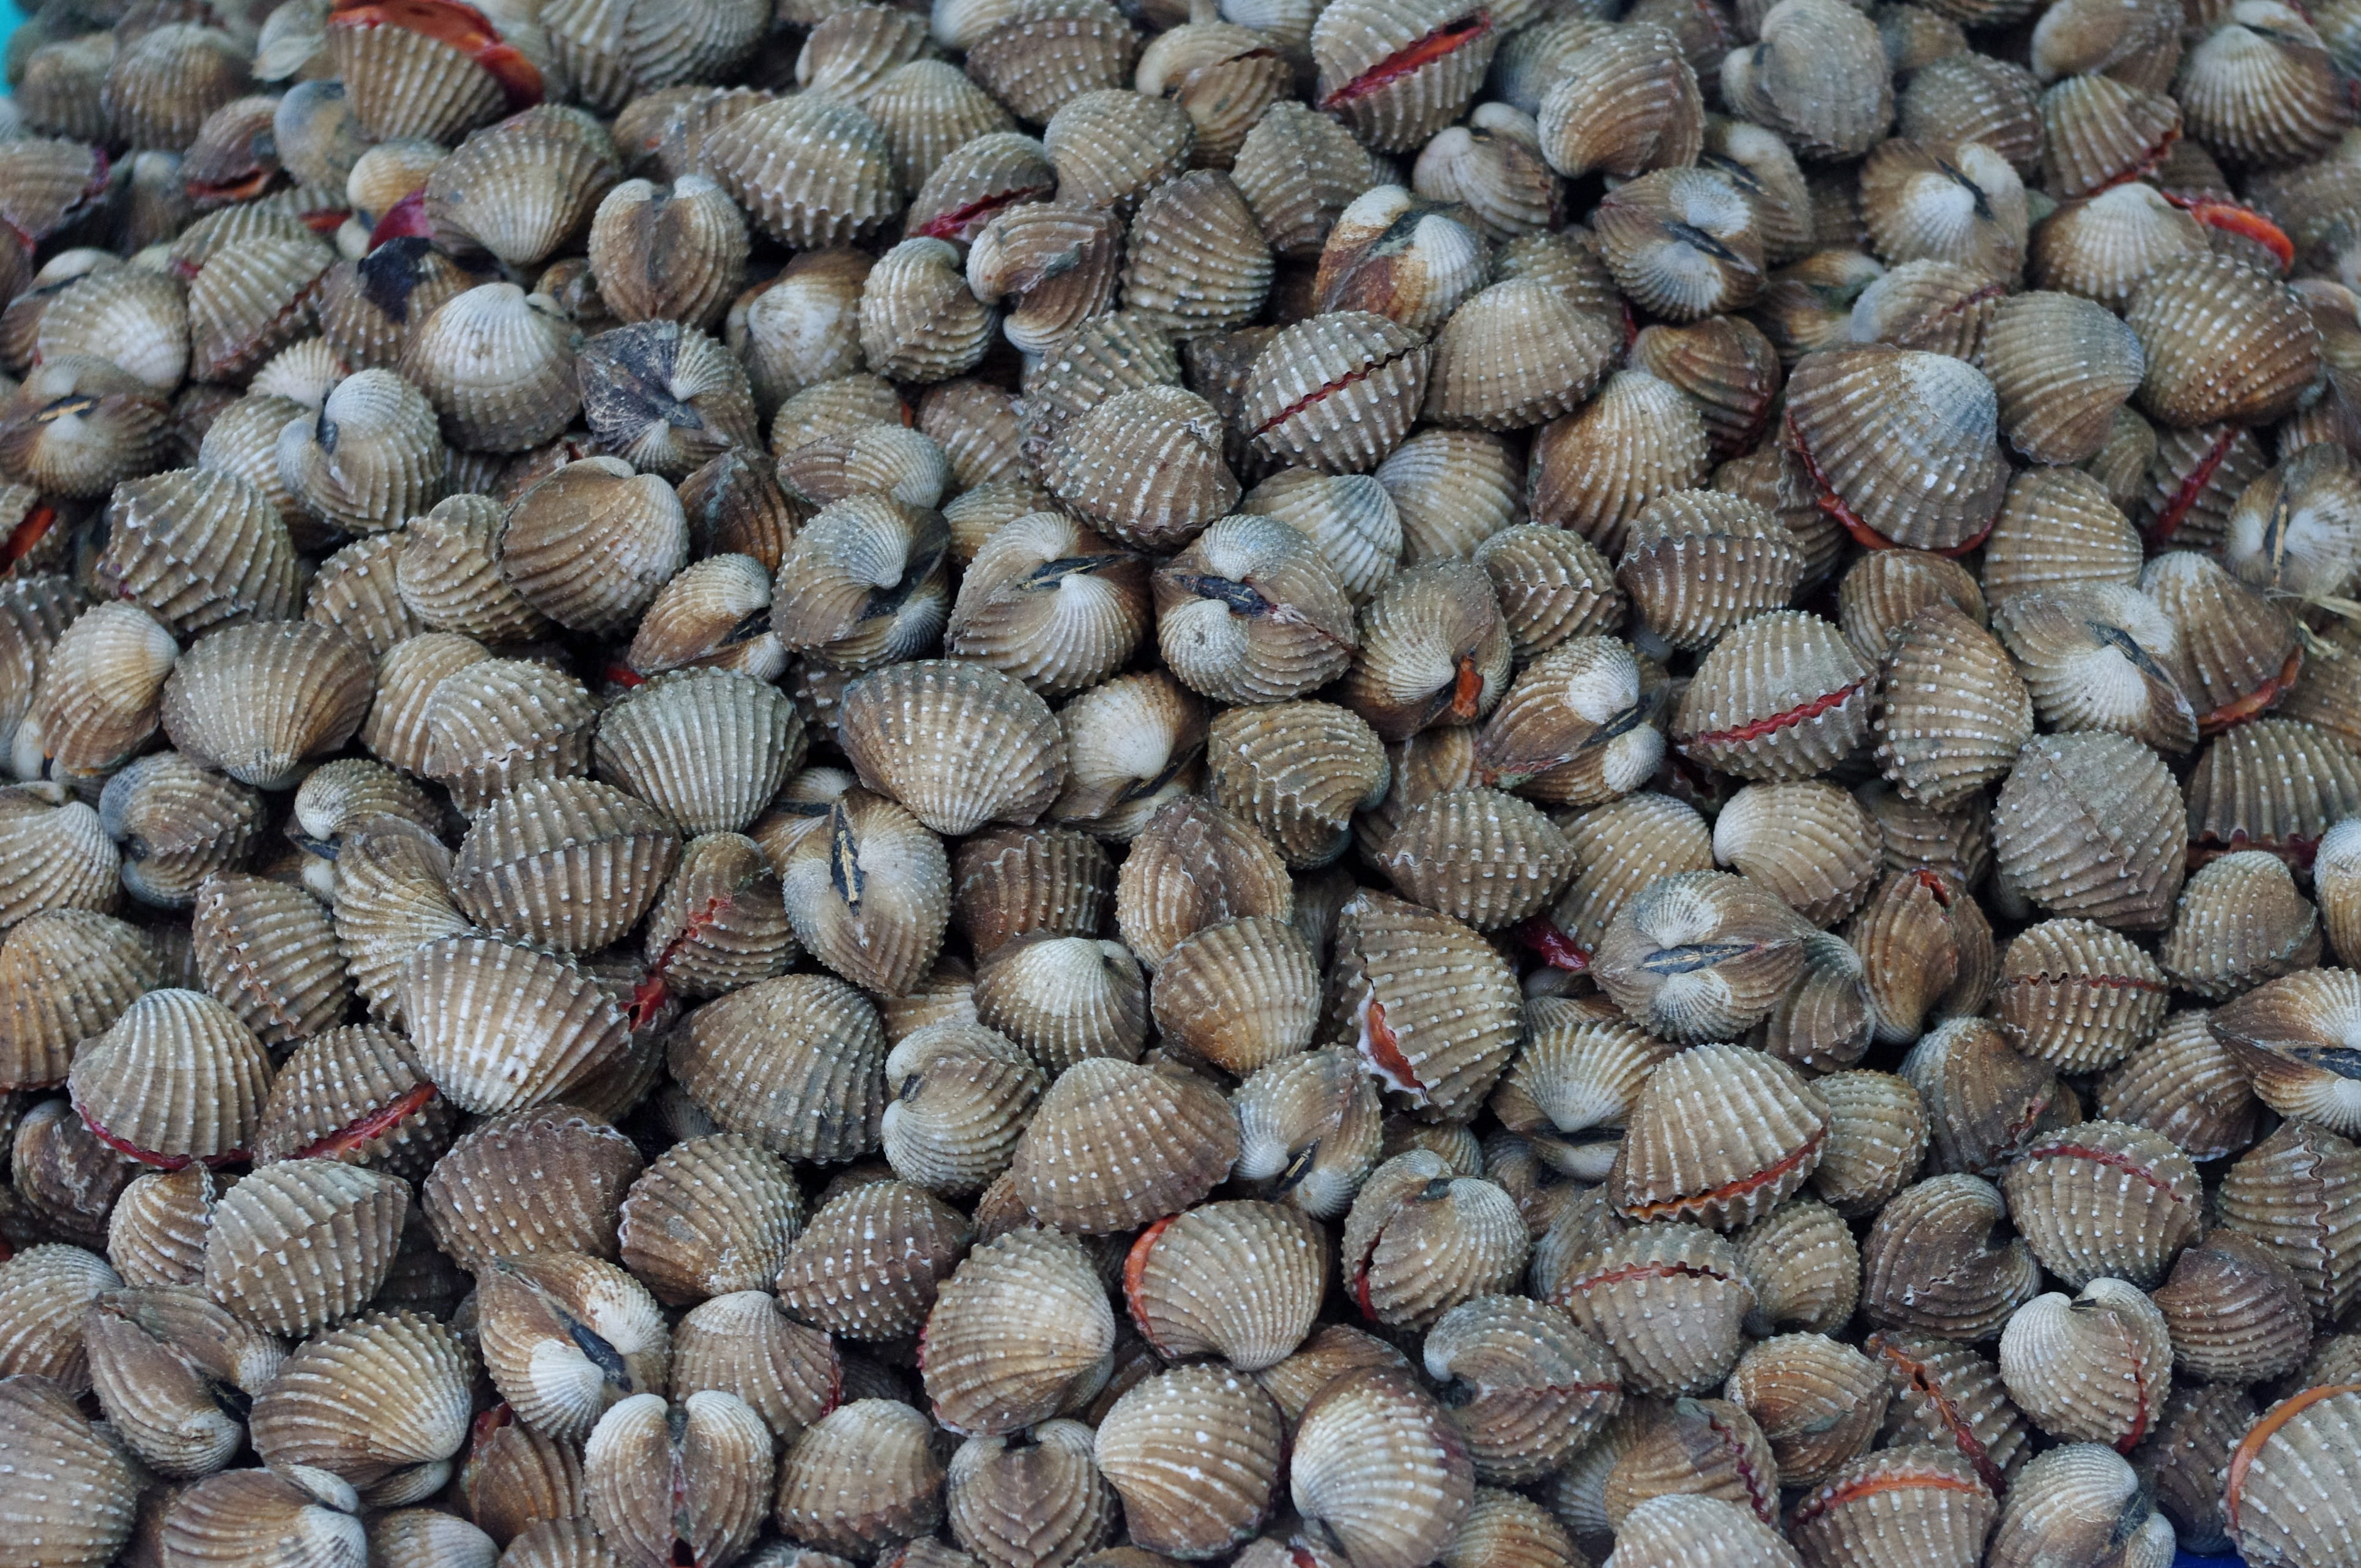 thailand-market, mussels, fresh mussels, seafood, luxury, fish business